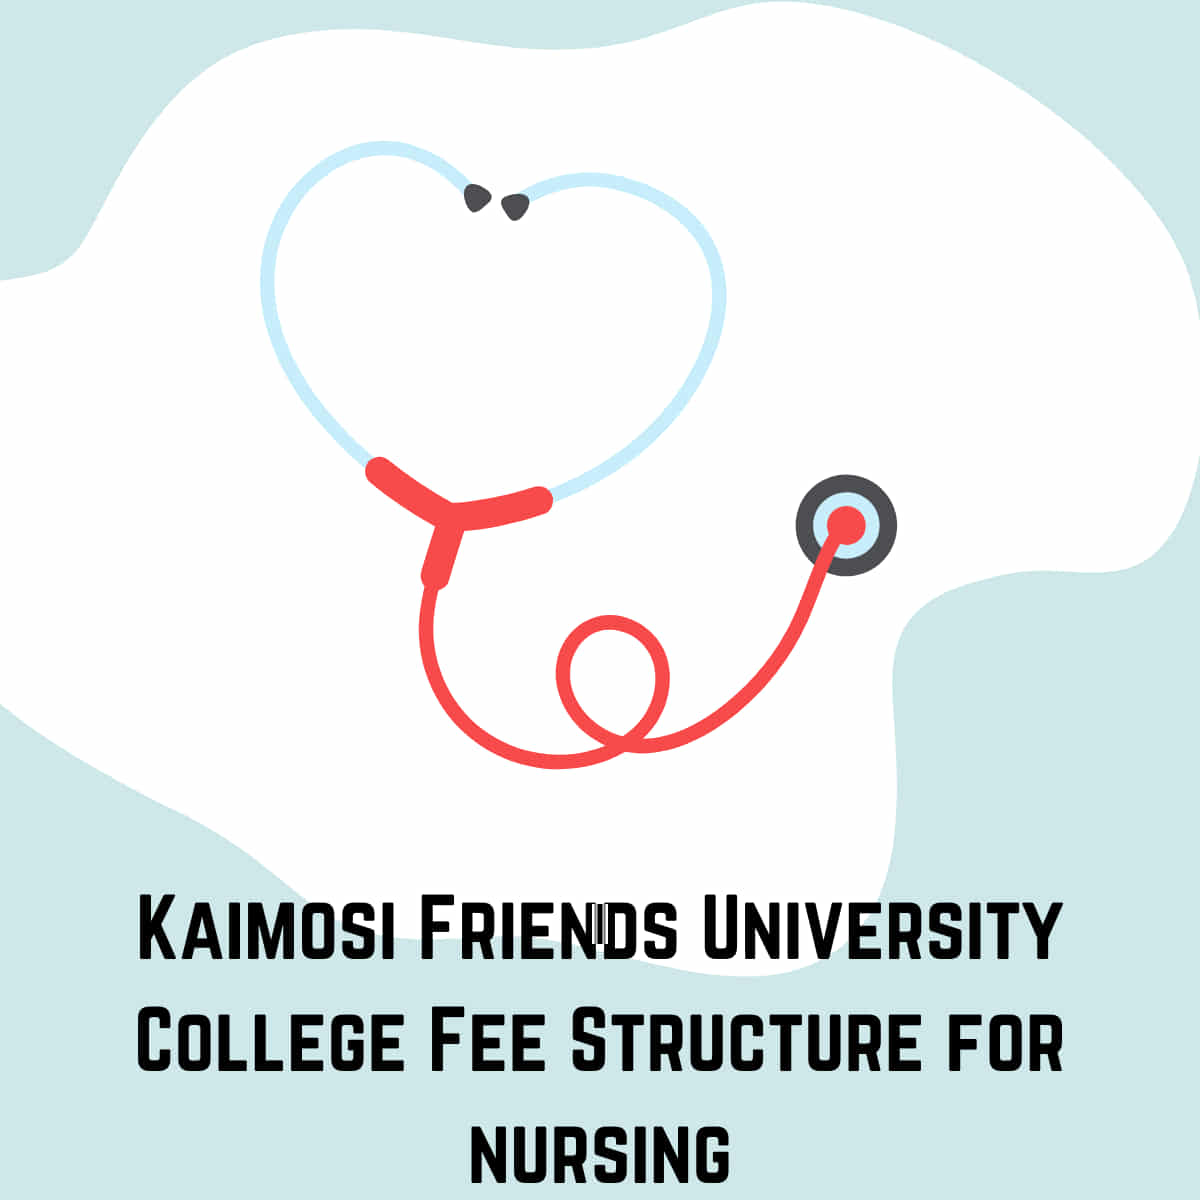 Kaimosi Friends University College Fee Structure for nursing